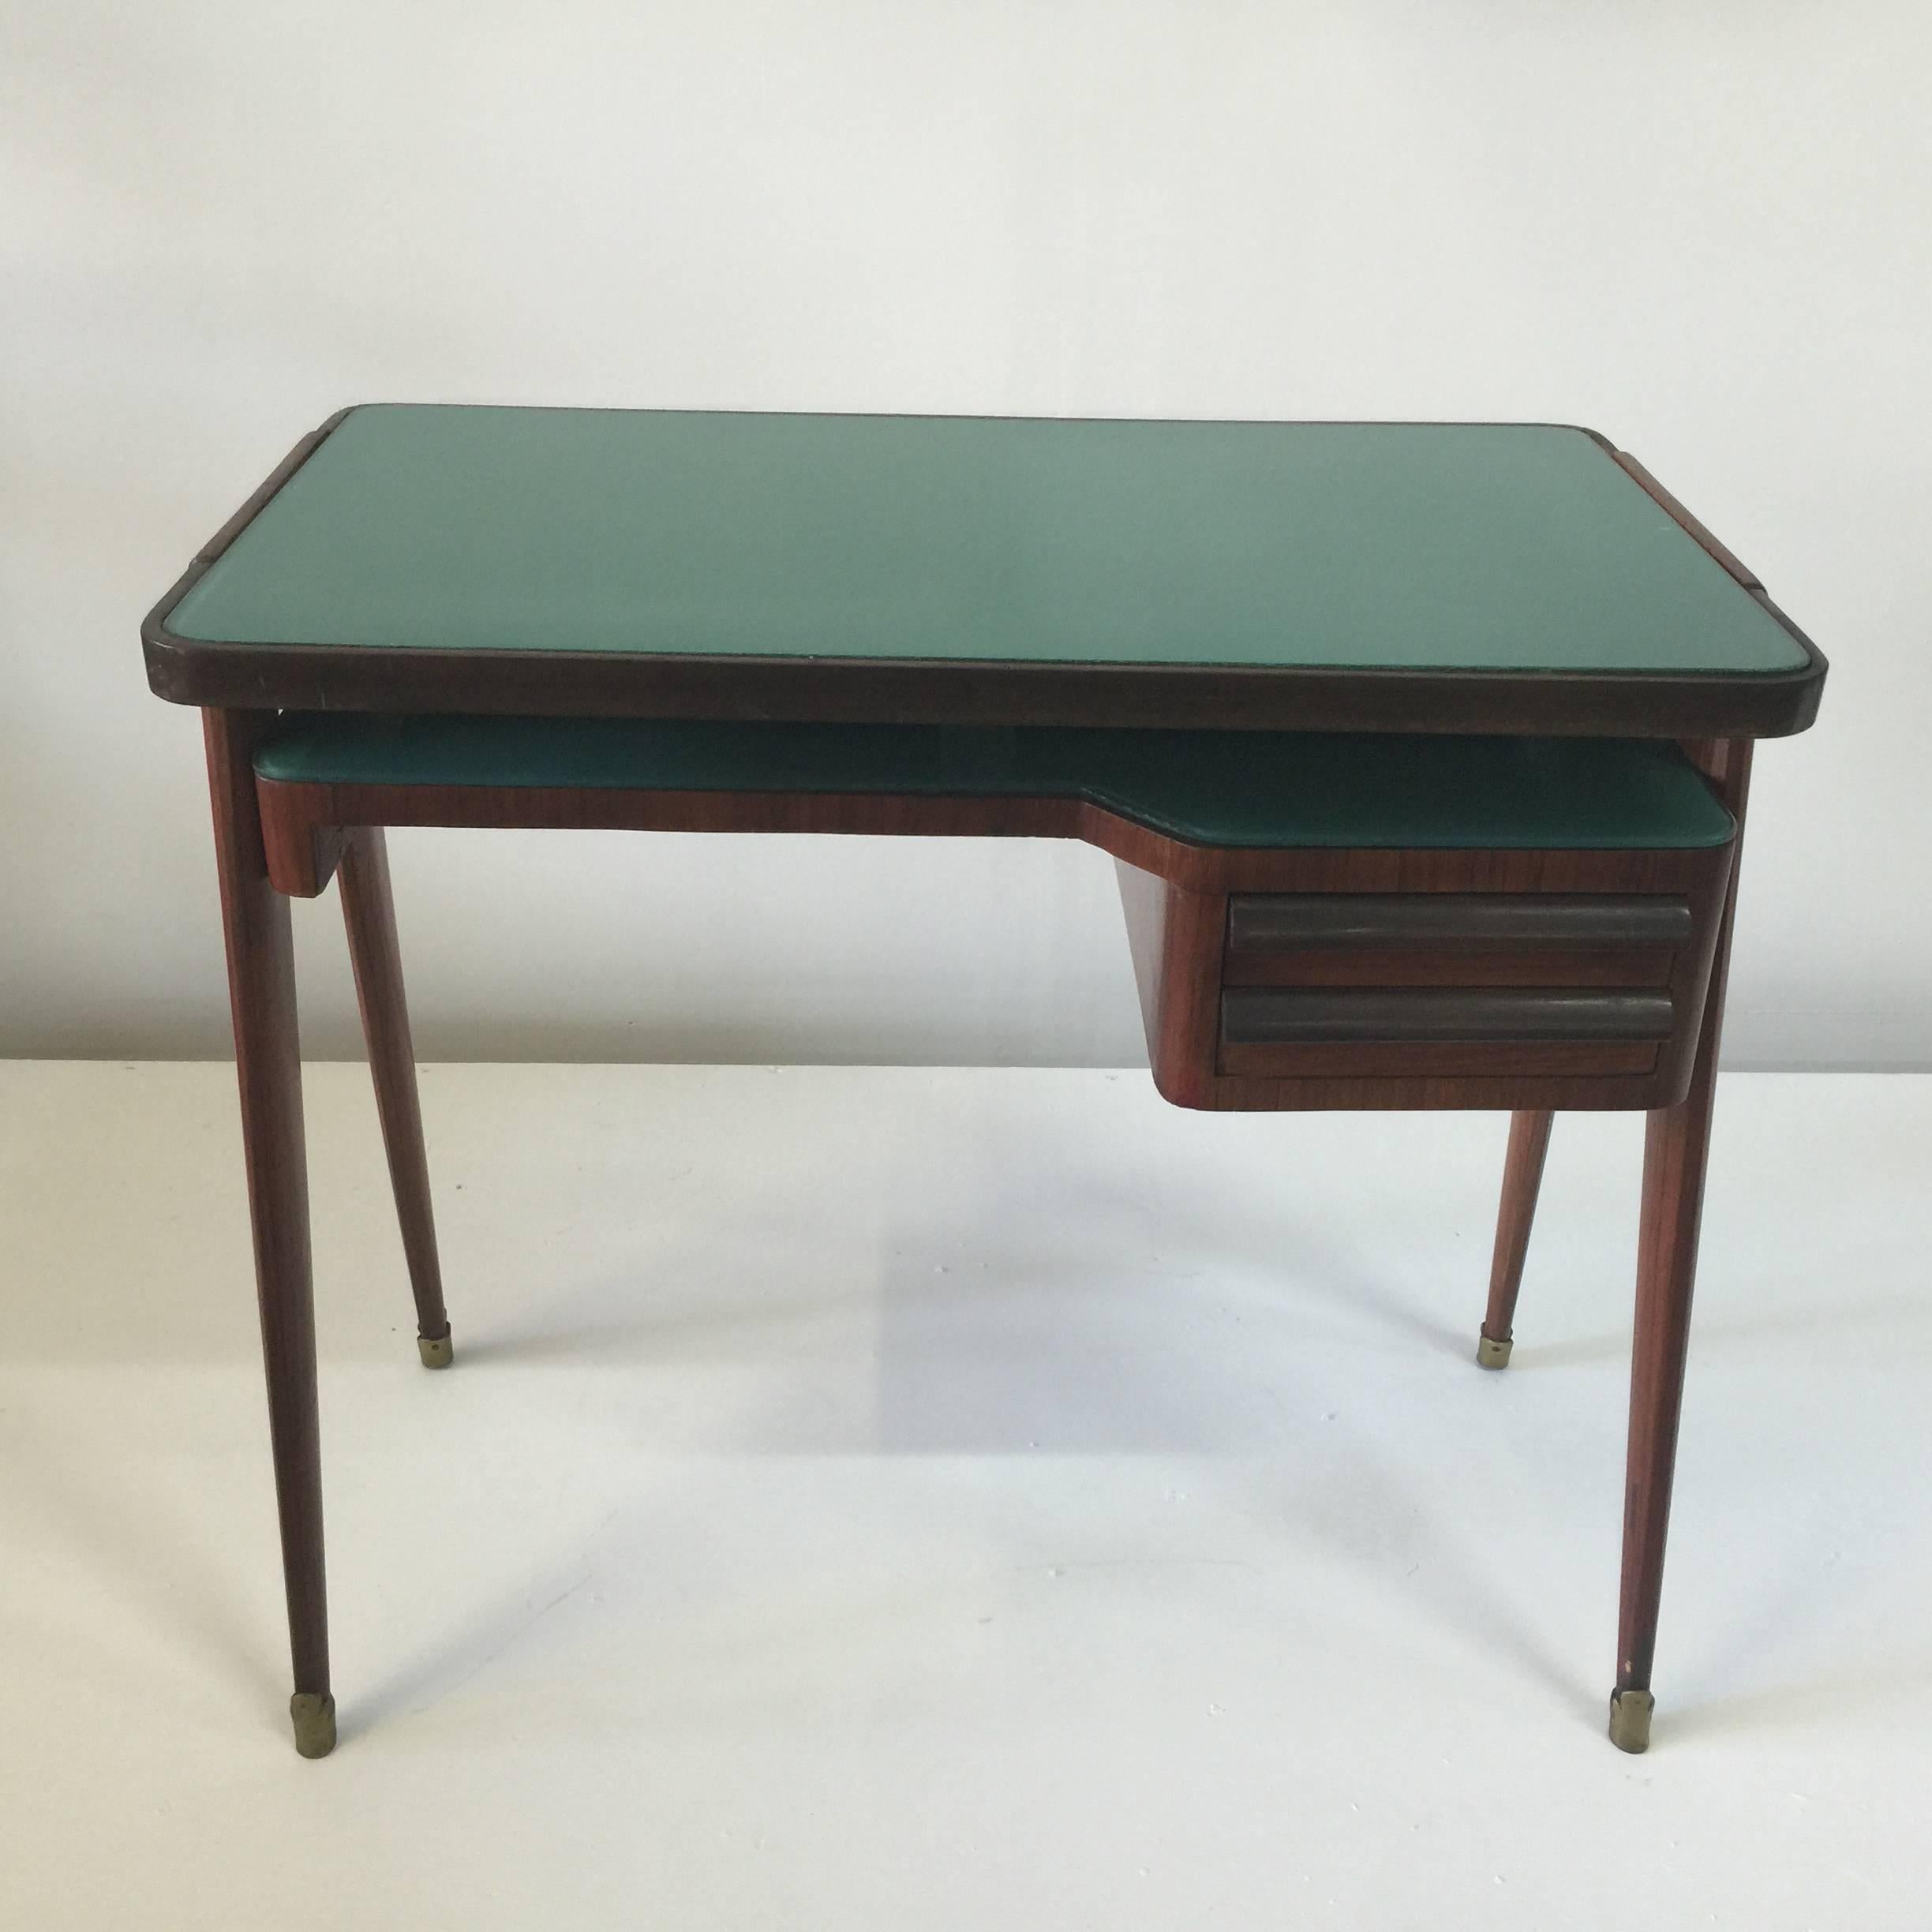 Mid-Century wood veneer desk by Paolo Buffa with glass top and brass sabots.

Elegantly styled Italian petite desk with drawer, green glass top and shelf with two drawers. Narrow depth makes this a wonderful fit and style for a small space.